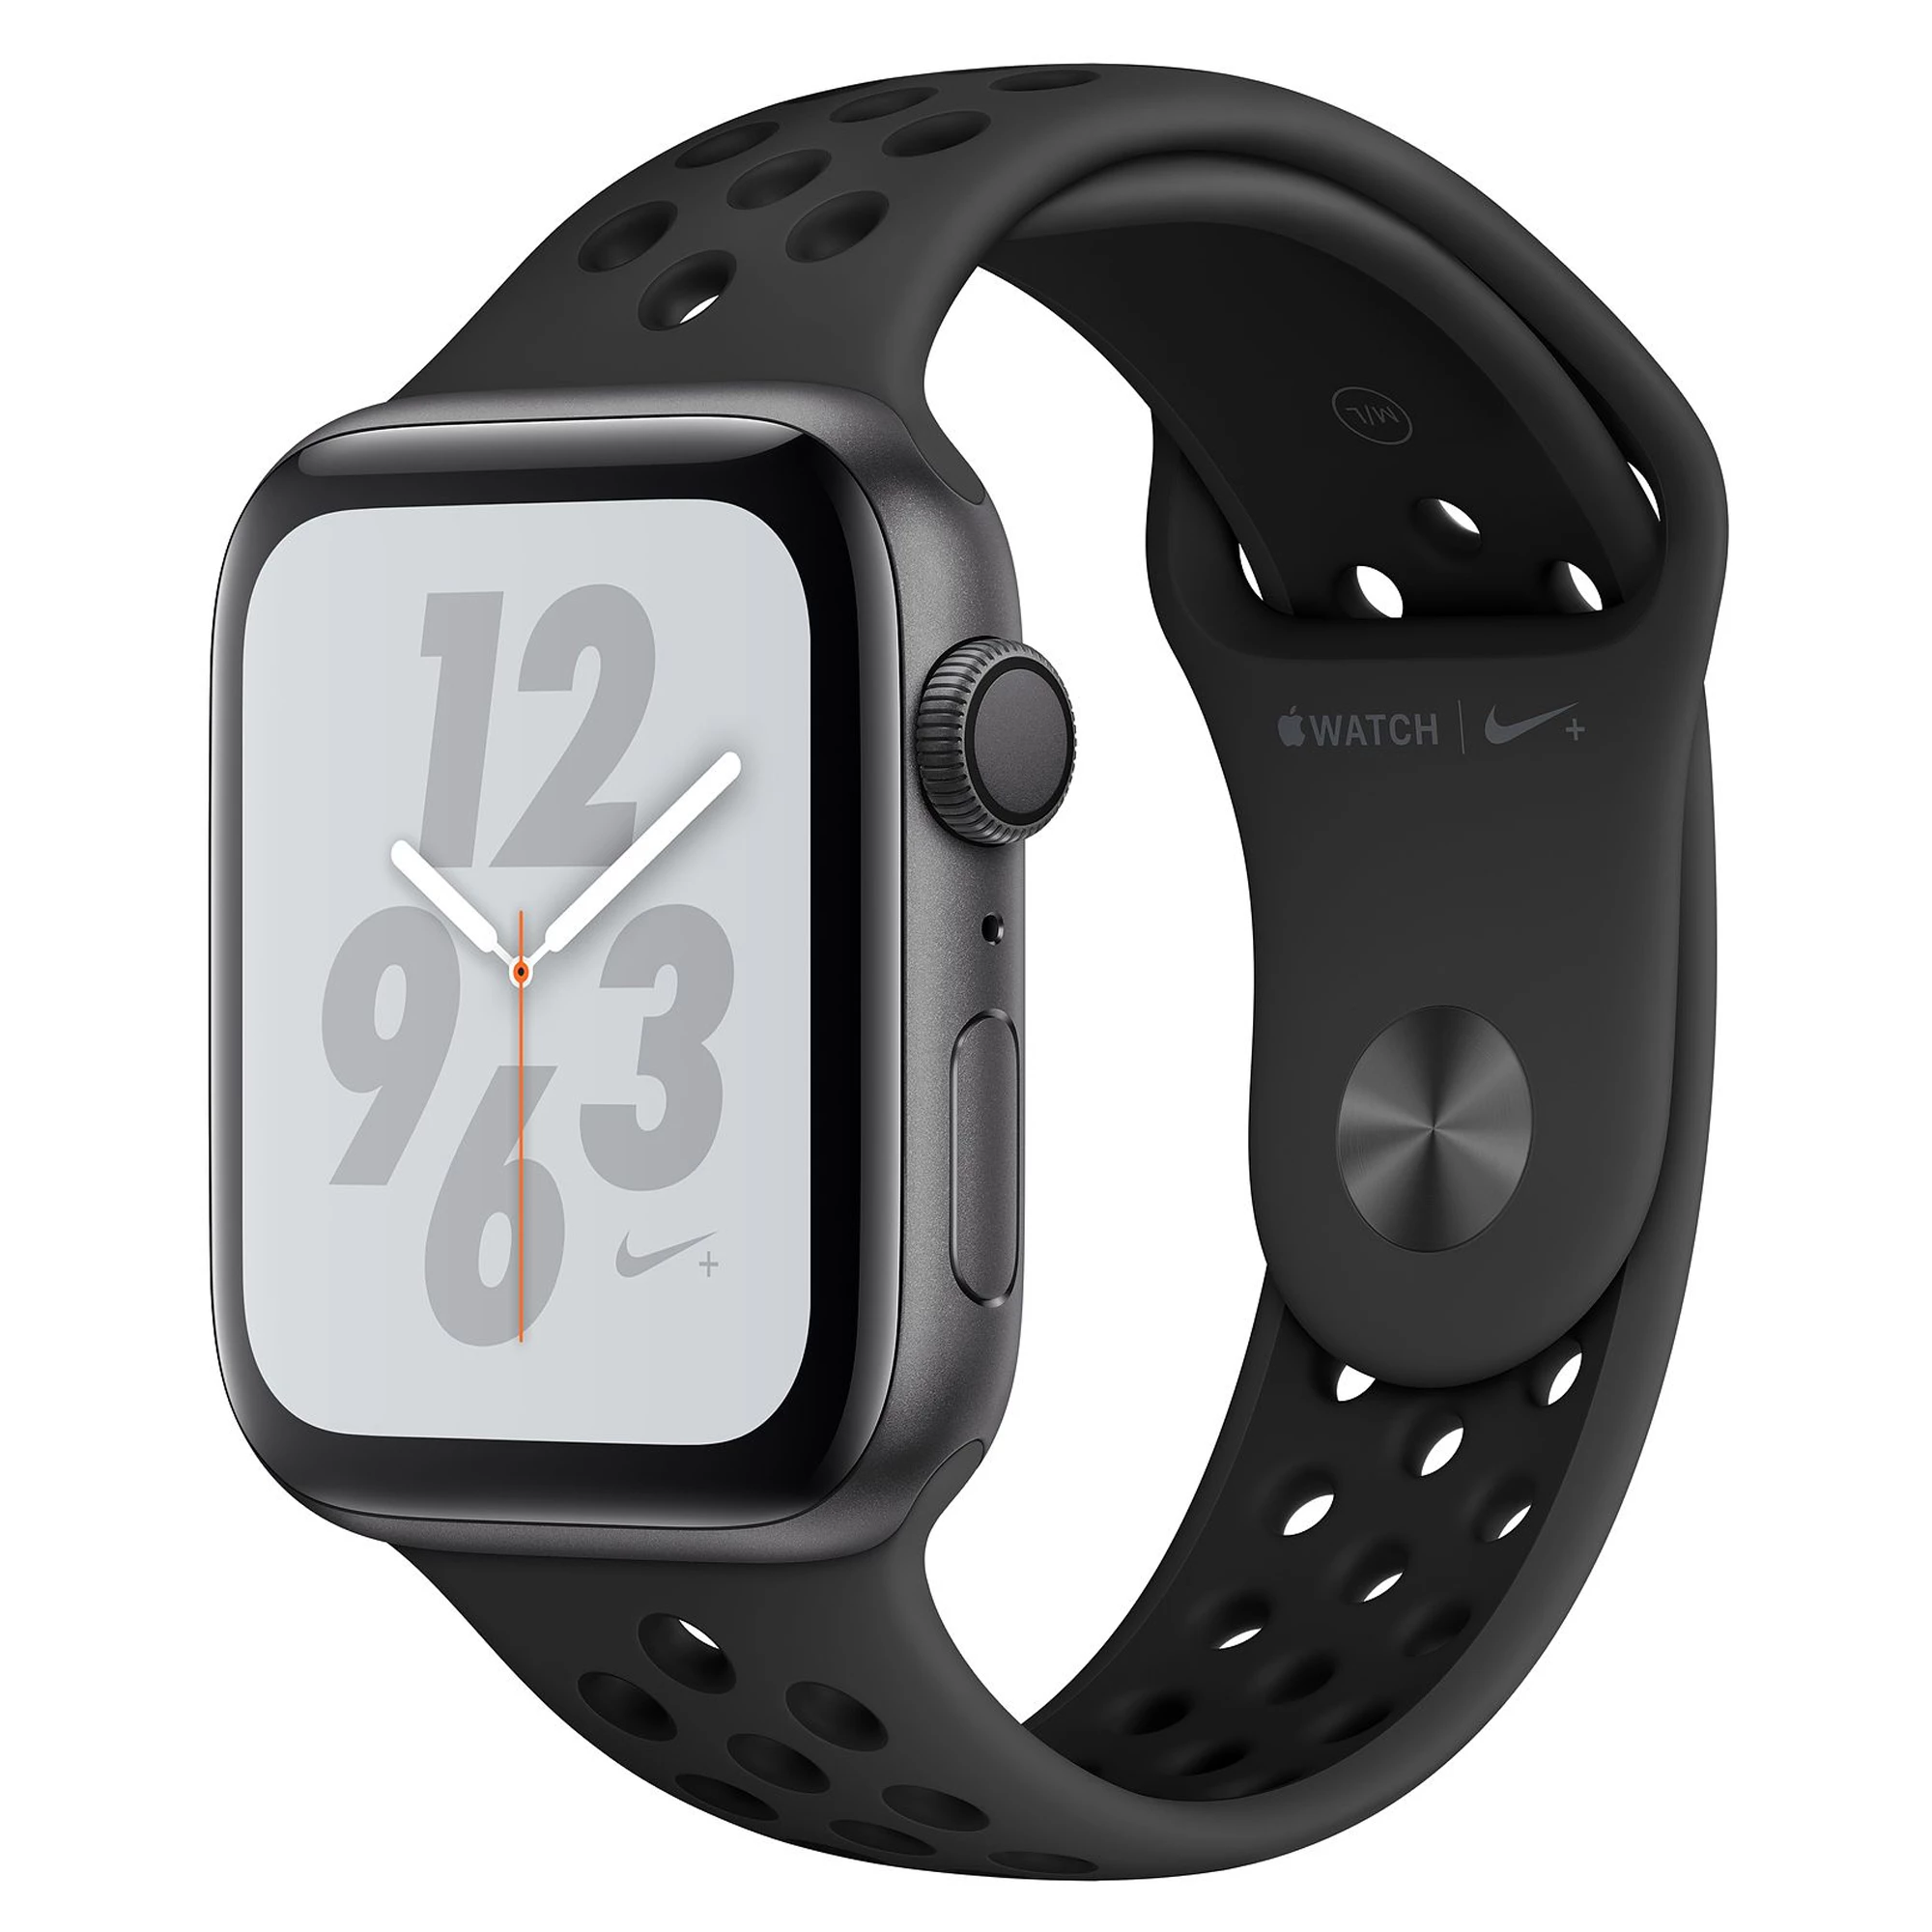 Apple Watch Series 4 Nike + (GPS) 44mm Space Gray Aluminium Case with Anthracite / Black Nike Sport Band (MU6L2)